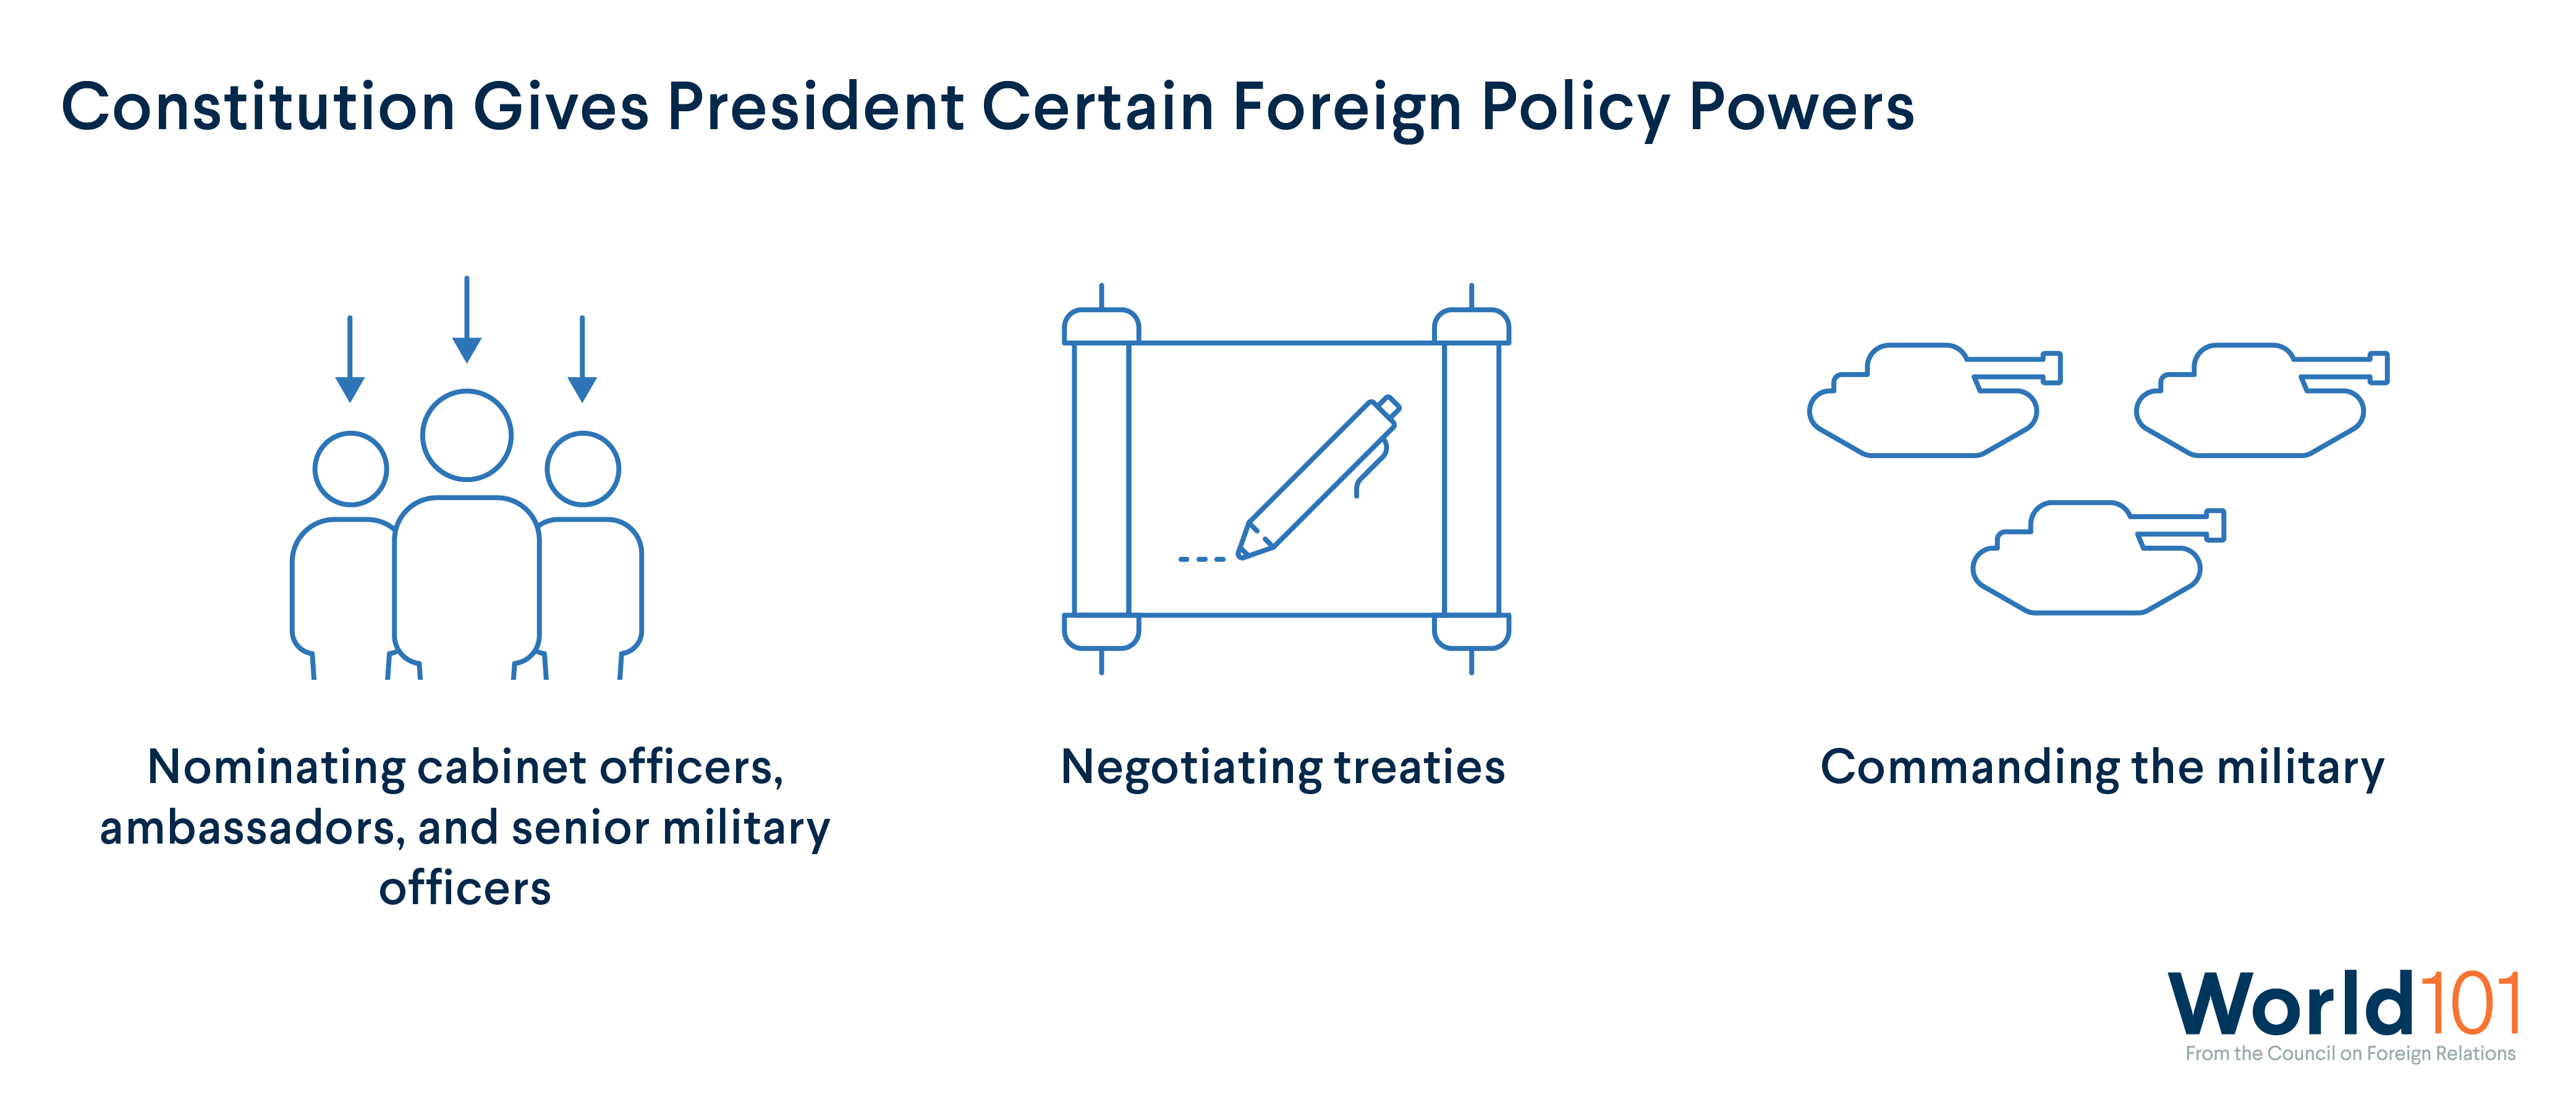 Constitution Gives President Certain Foreign Policy Powers: Nominating cabinet officers, ambassadors and senior military officers, negotiating treaties and commanding the military. For more info contact us at world101@cfr.org.